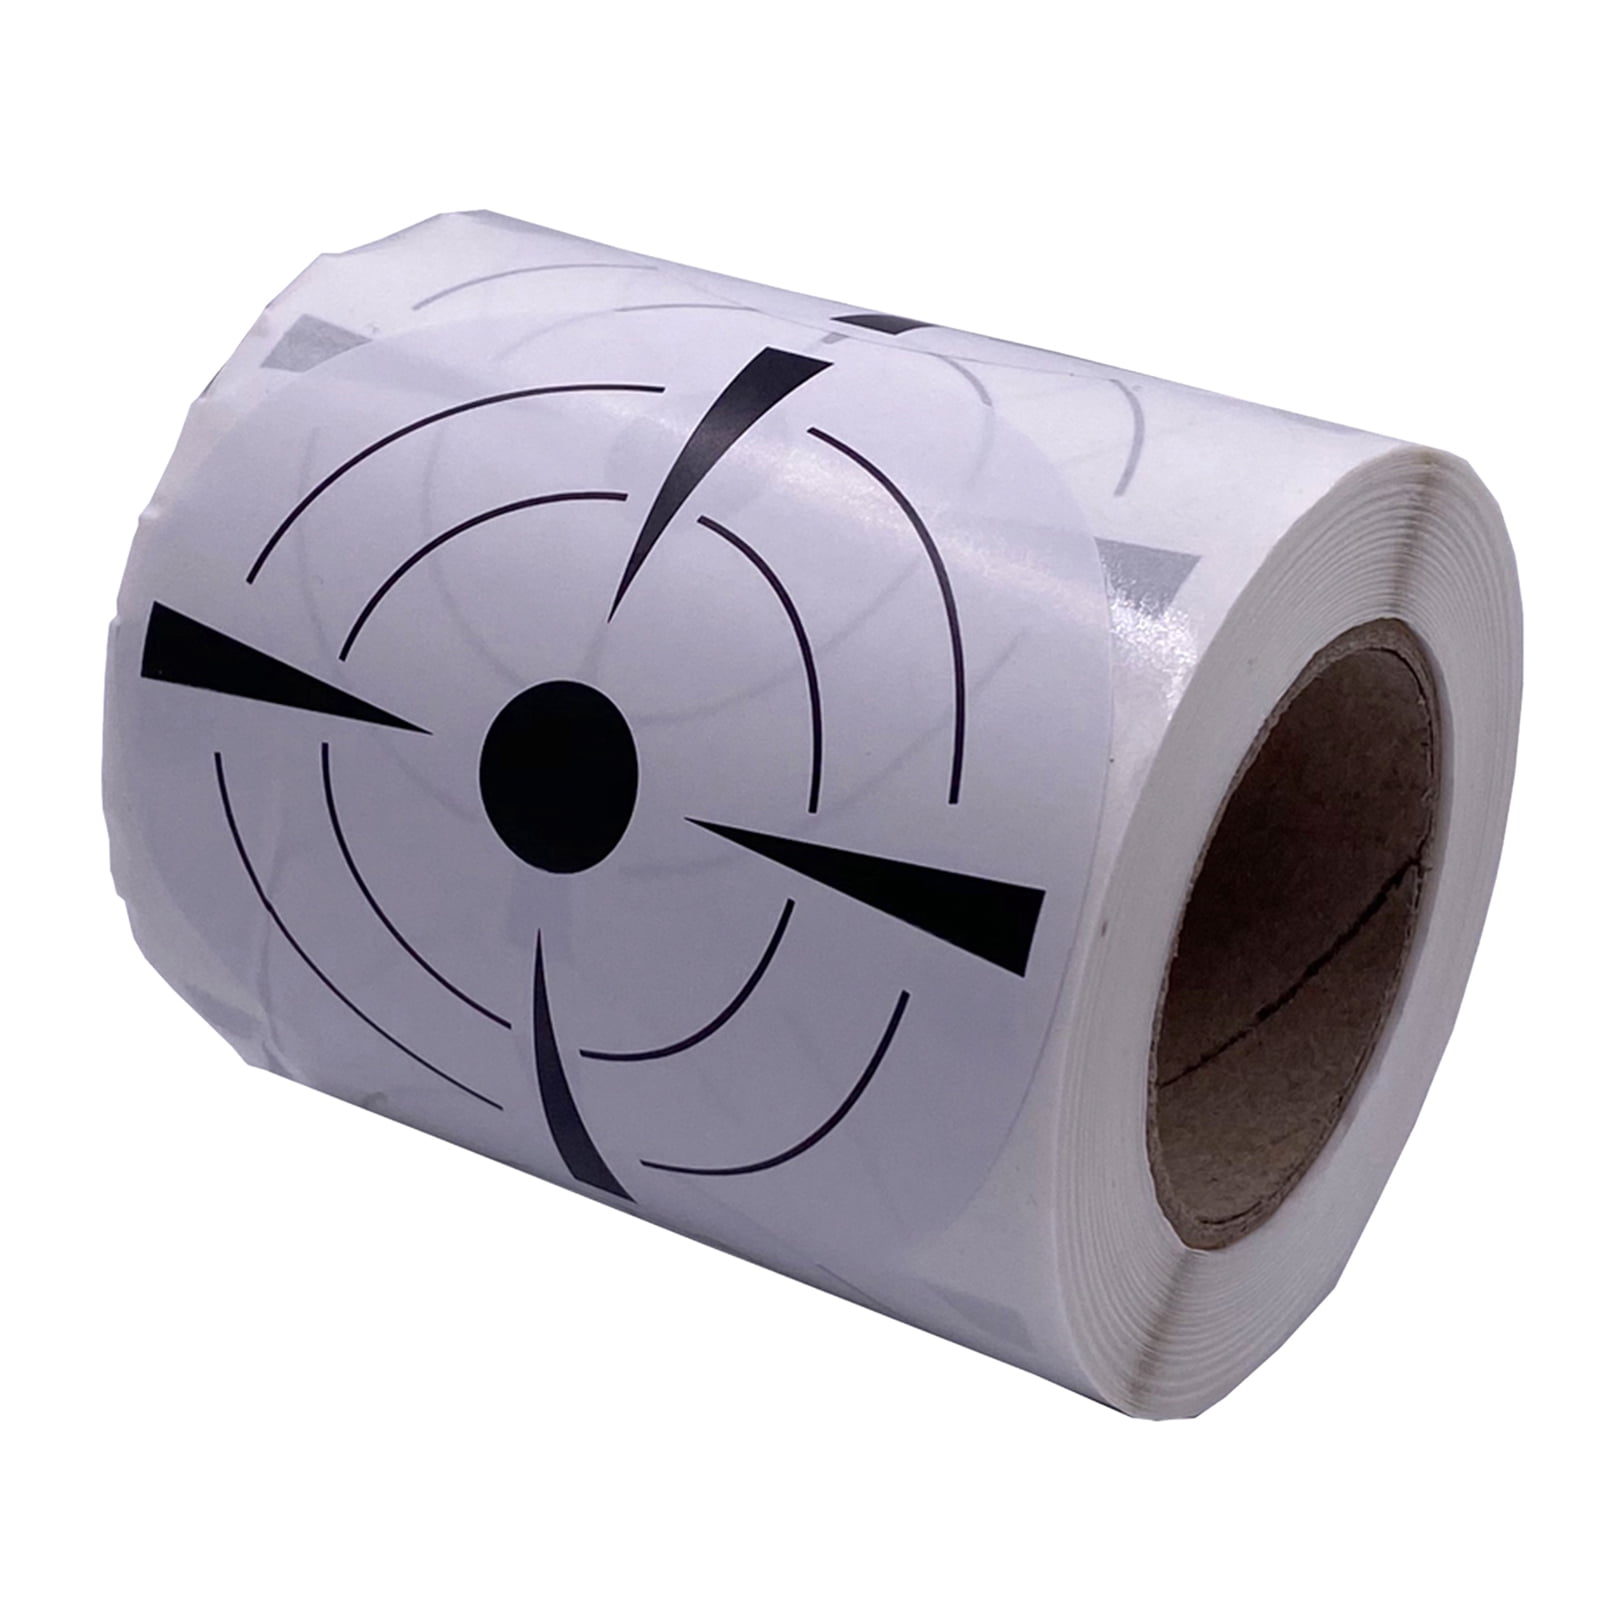 Details about   200/Roll Round Florescent Targets Stickers 3In for Hunting Shooting Practice 